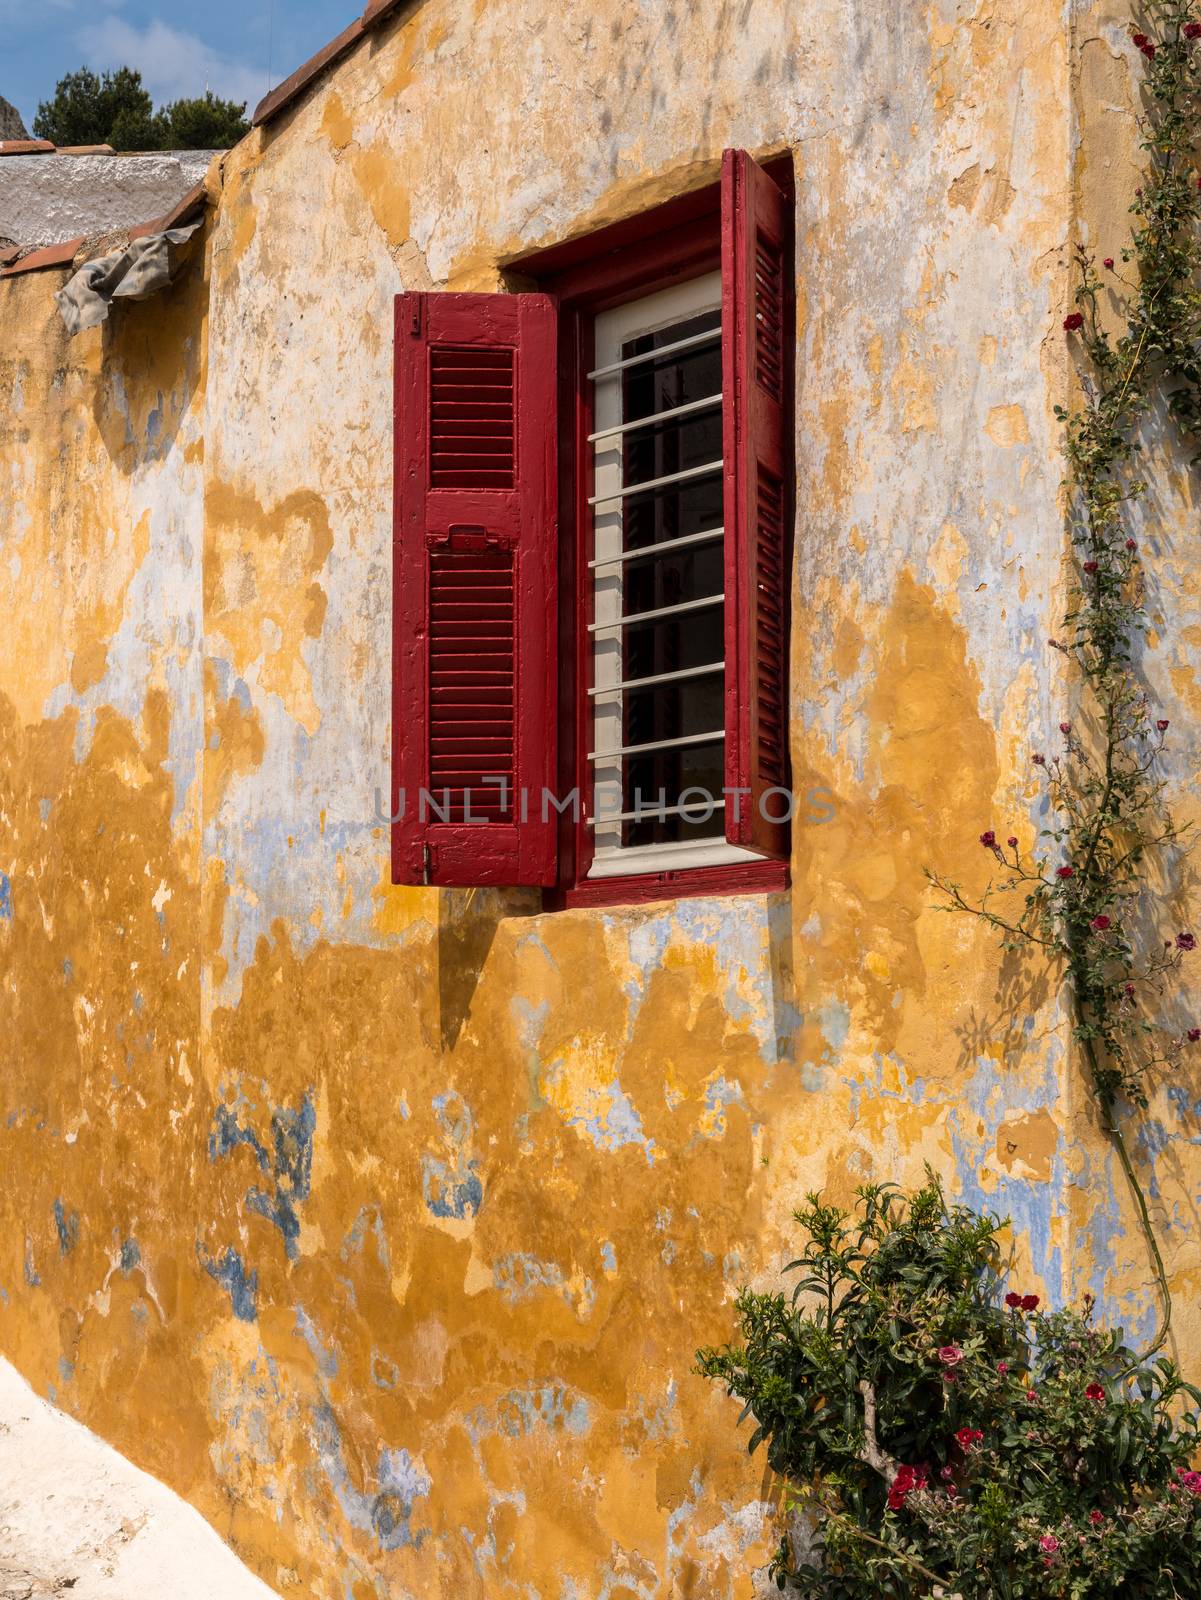 Red shutters on window in ancient district of Anafiotika in Athens Greece by steheap